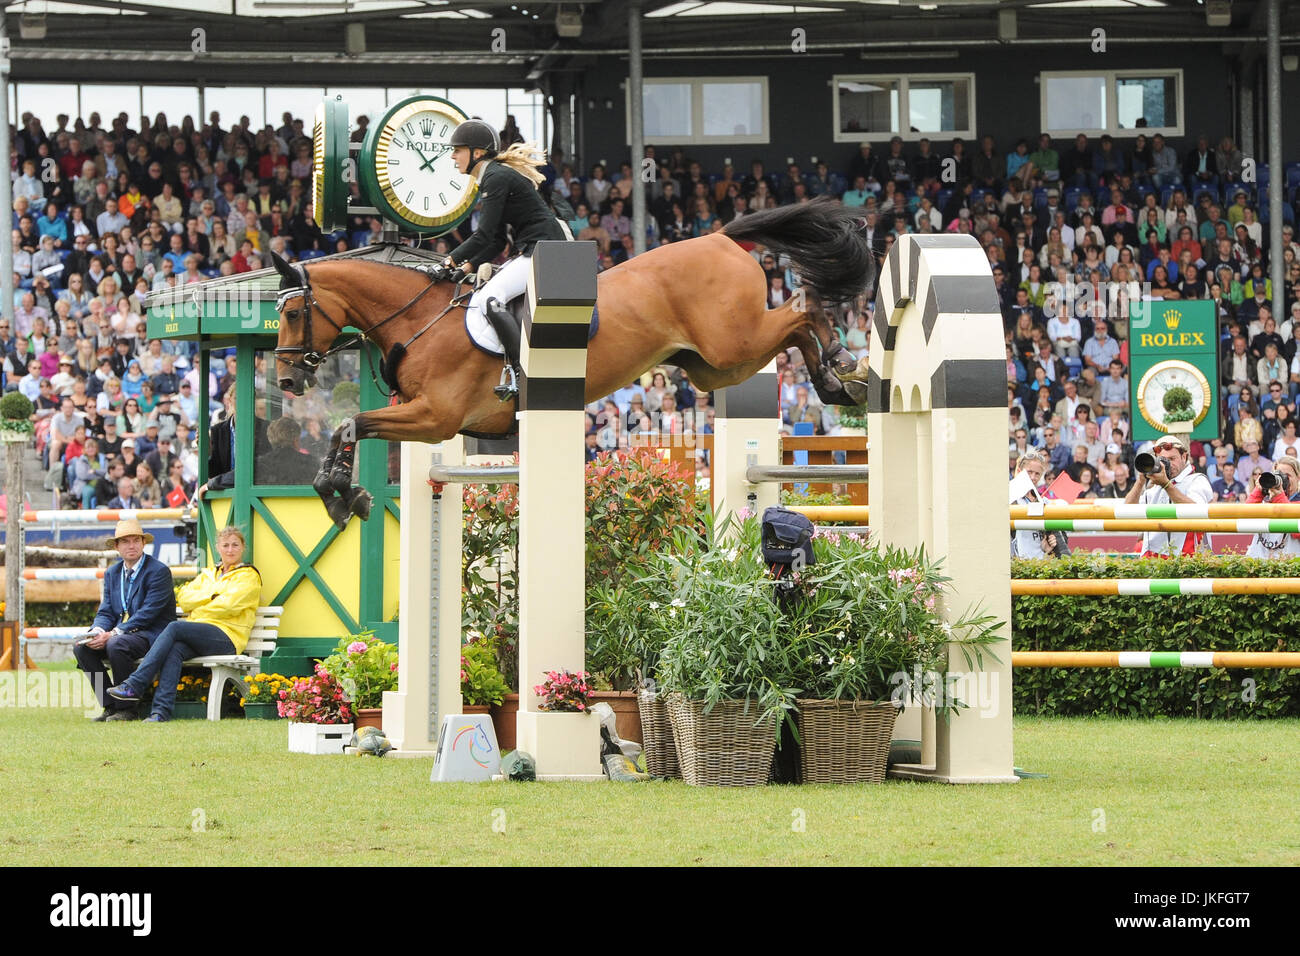 Aachen, Germany. 23rd July, 2017. Showjumper Laura Klaphake on horse Stock  Photo - Alamy